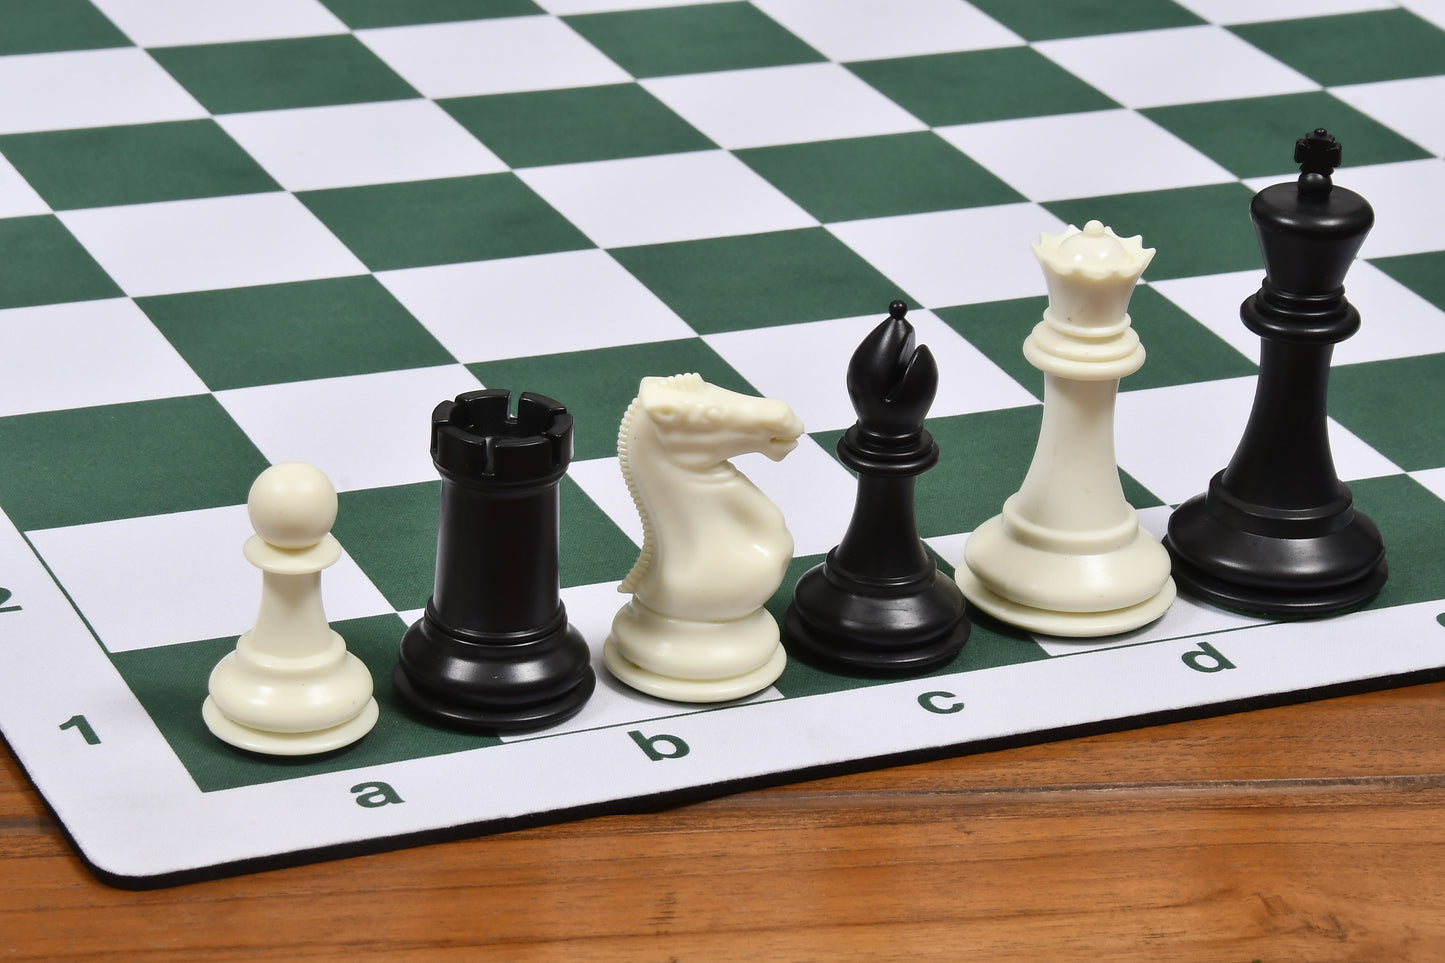 The Professional Staunton Series Tournament Chess Pieces Sets in Black Dyed & Ivory White Solid Plastic - 3.75" King